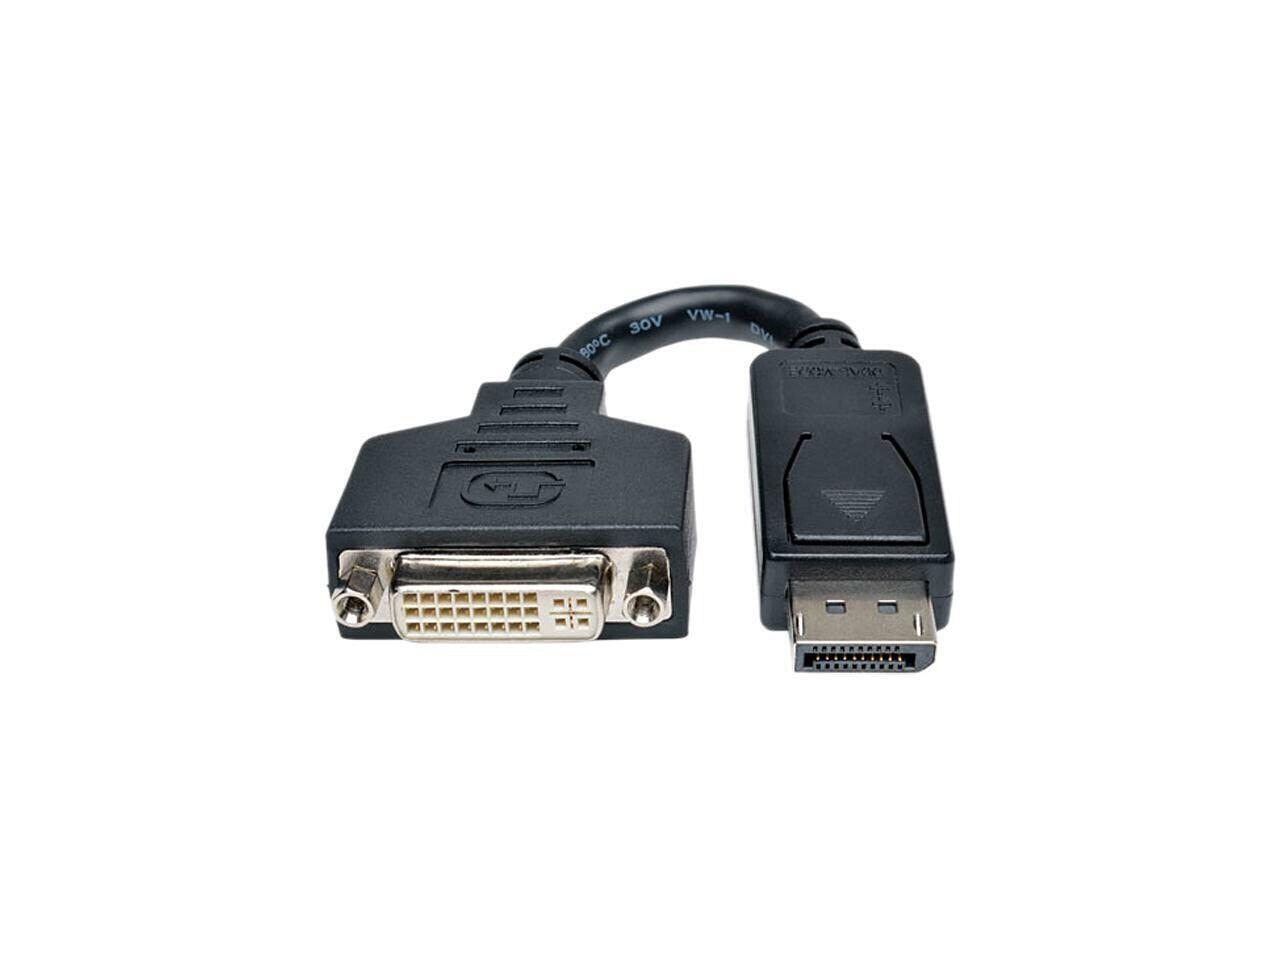 Tripp Lite DisplayPort to DVI Cable Adapter, Converter for DP to DVI-I M/F (P134